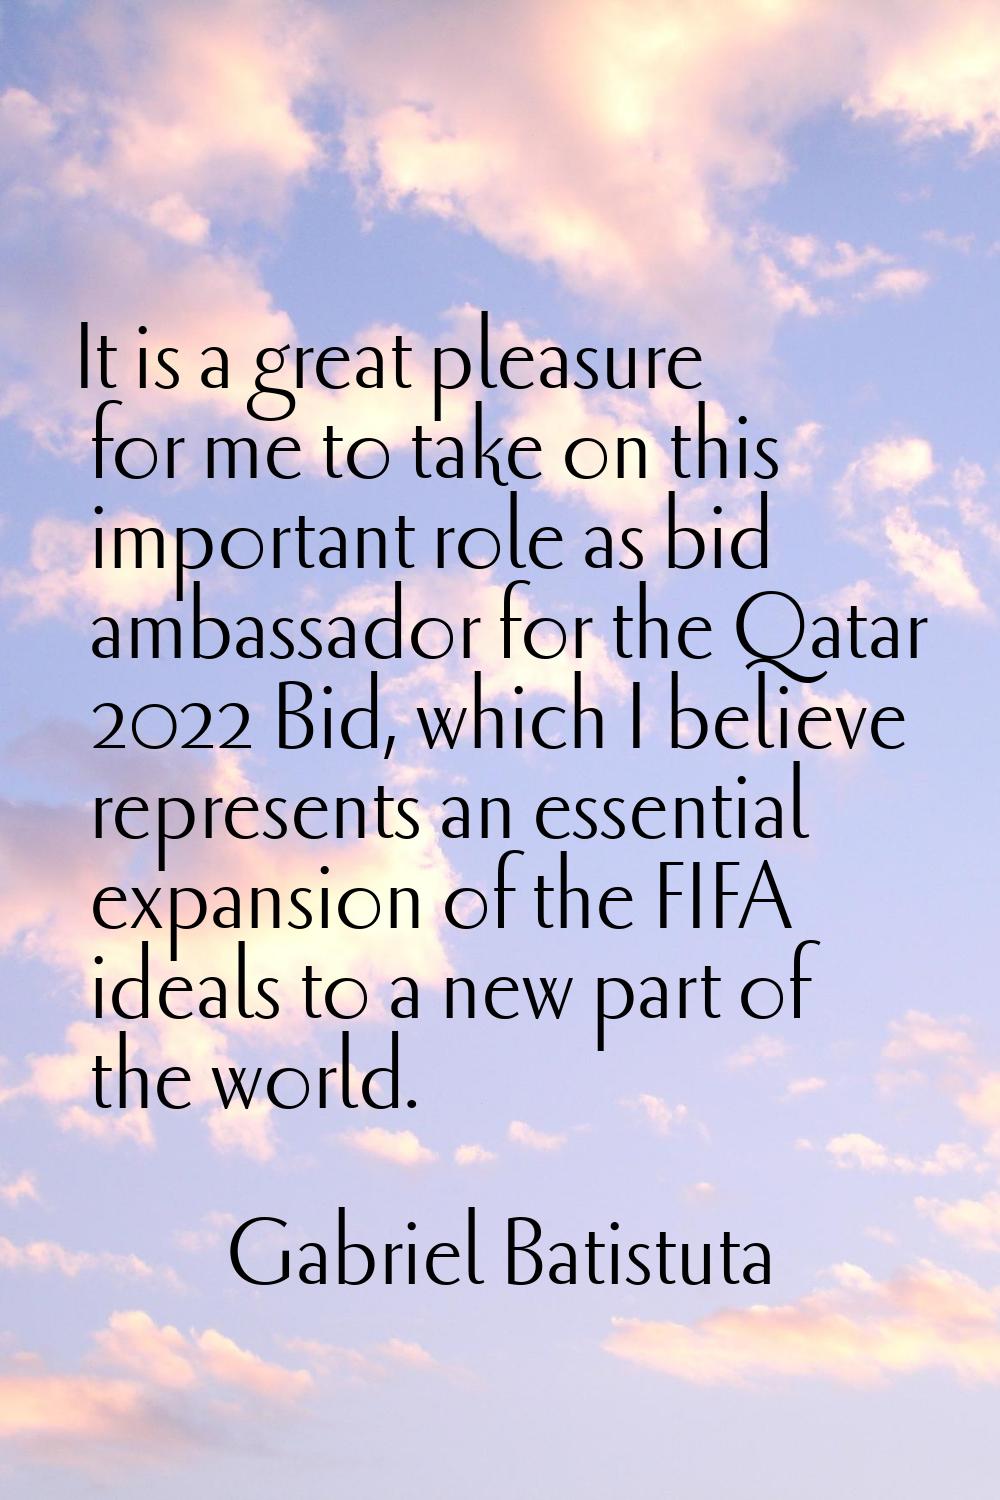 It is a great pleasure for me to take on this important role as bid ambassador for the Qatar 2022 B